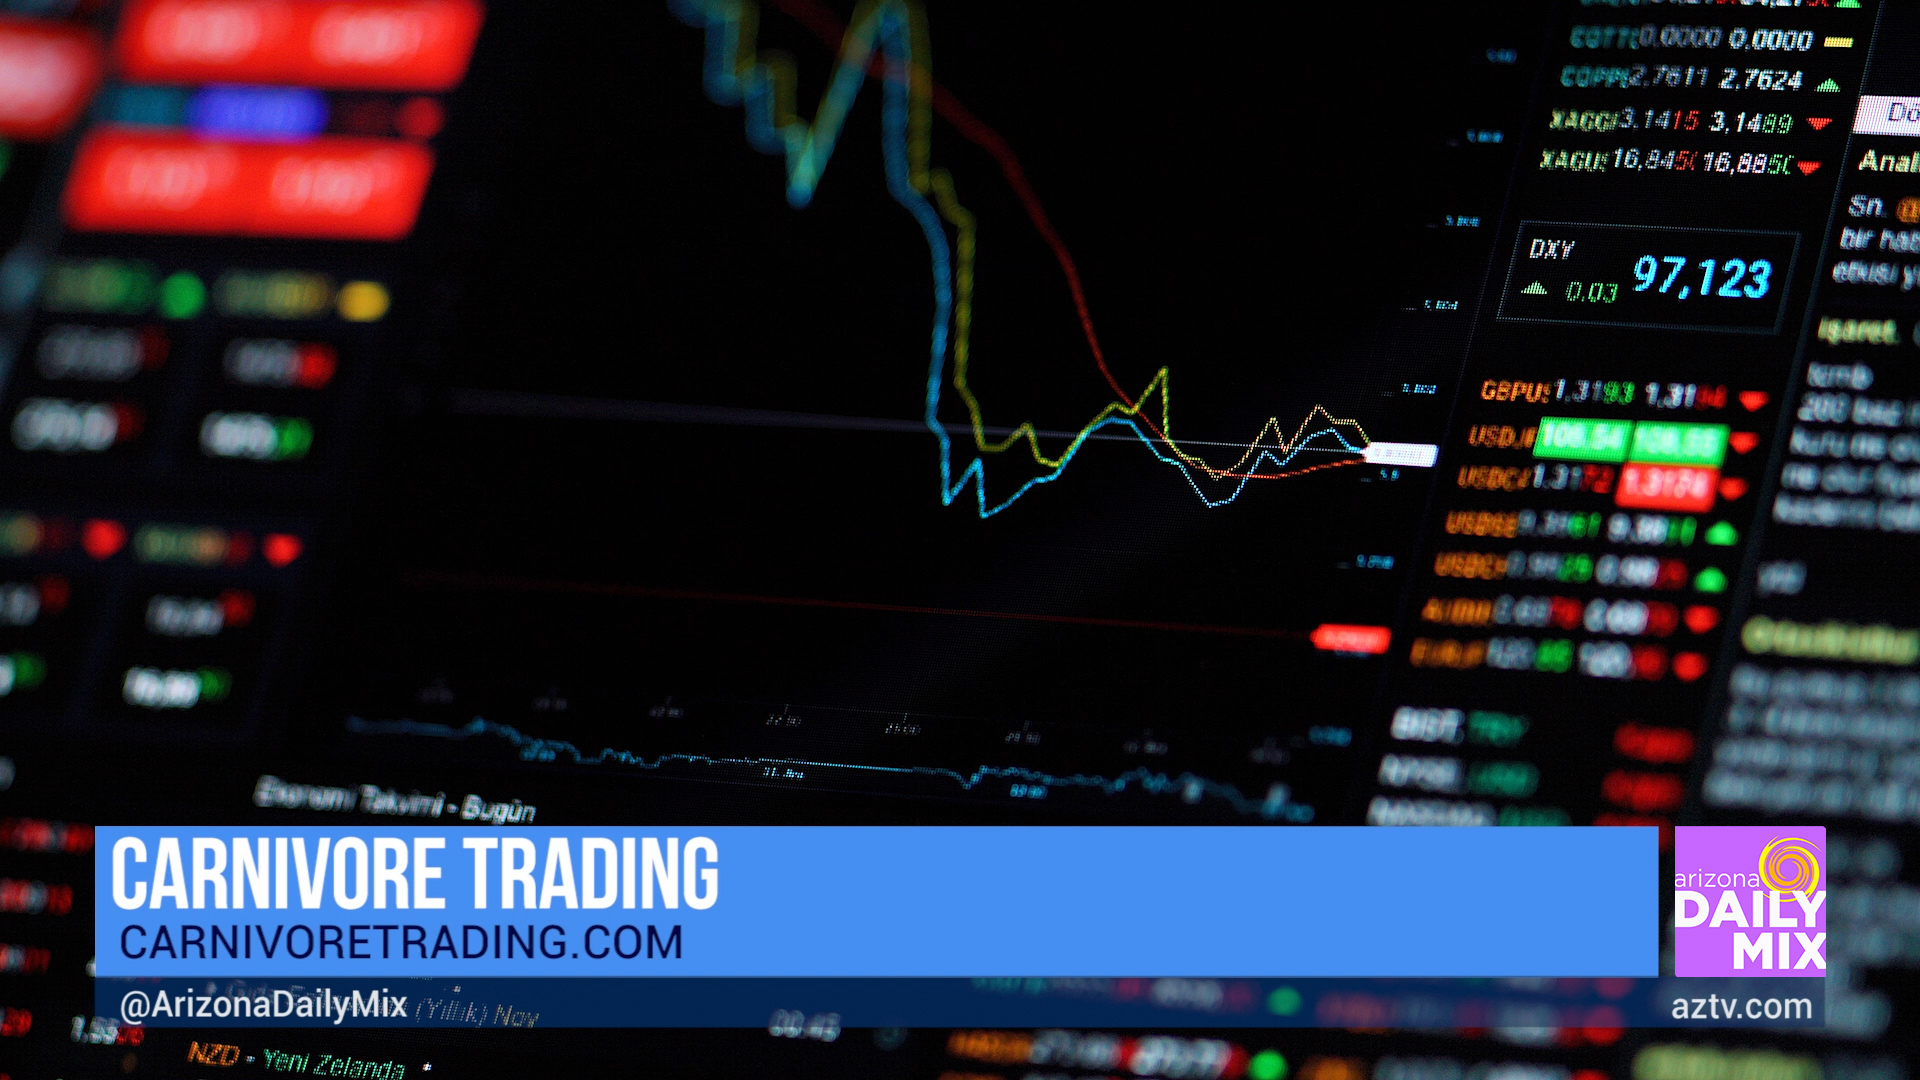 Learn How to Execute High Quality Trades with Carnivore Trading